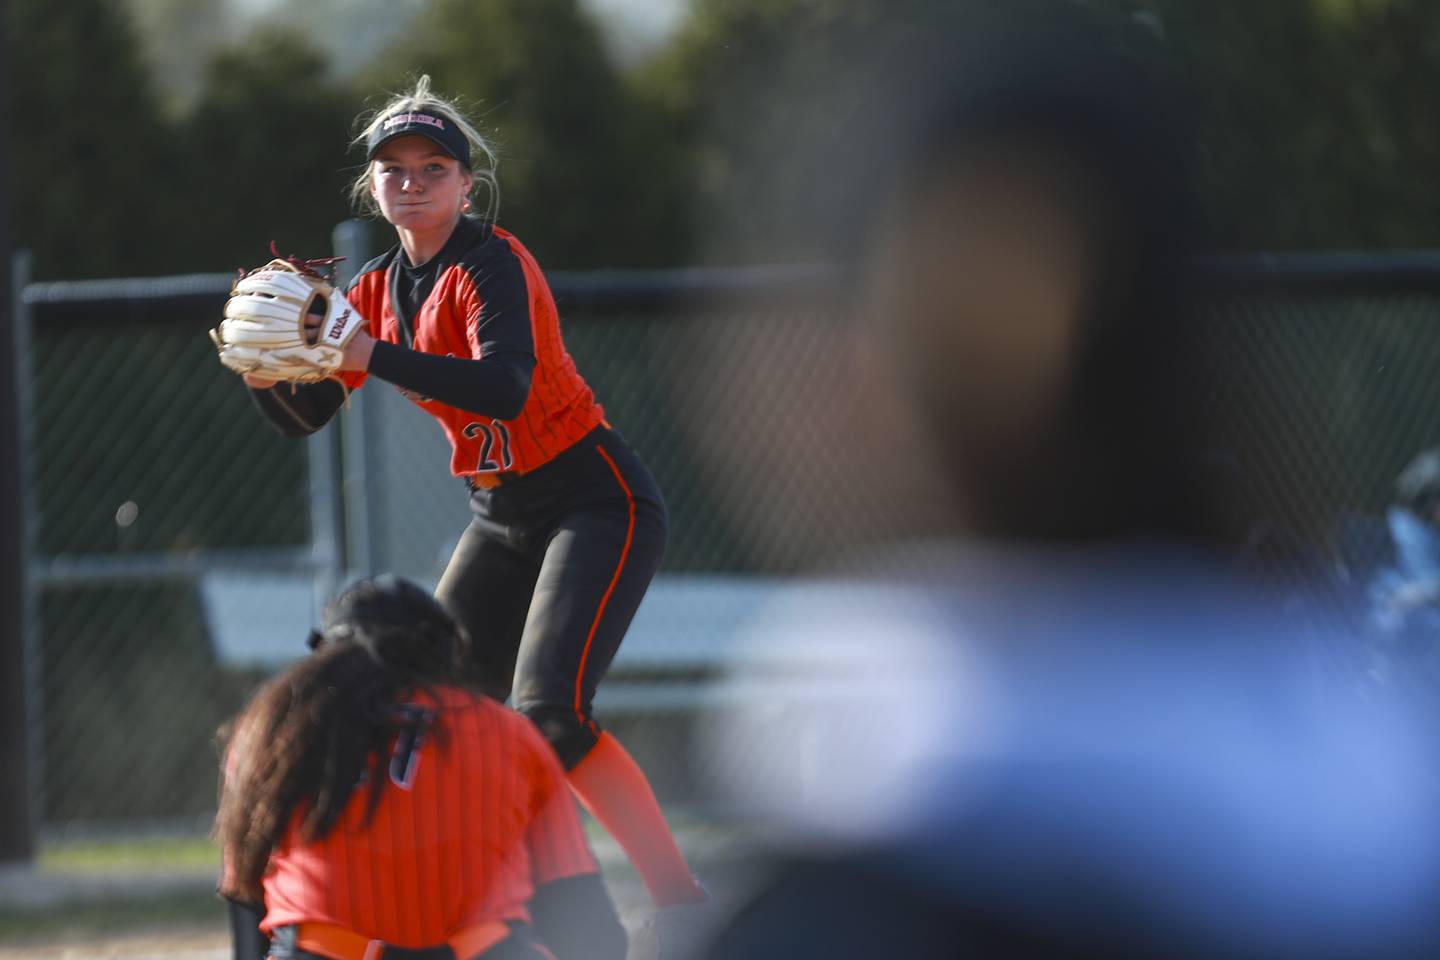 Minooka third baseman Megan Medlin prepares to throw out a runner on Thursday, April 22, 2021, at Lincoln-Way Central High School in New Lenox, Ill.